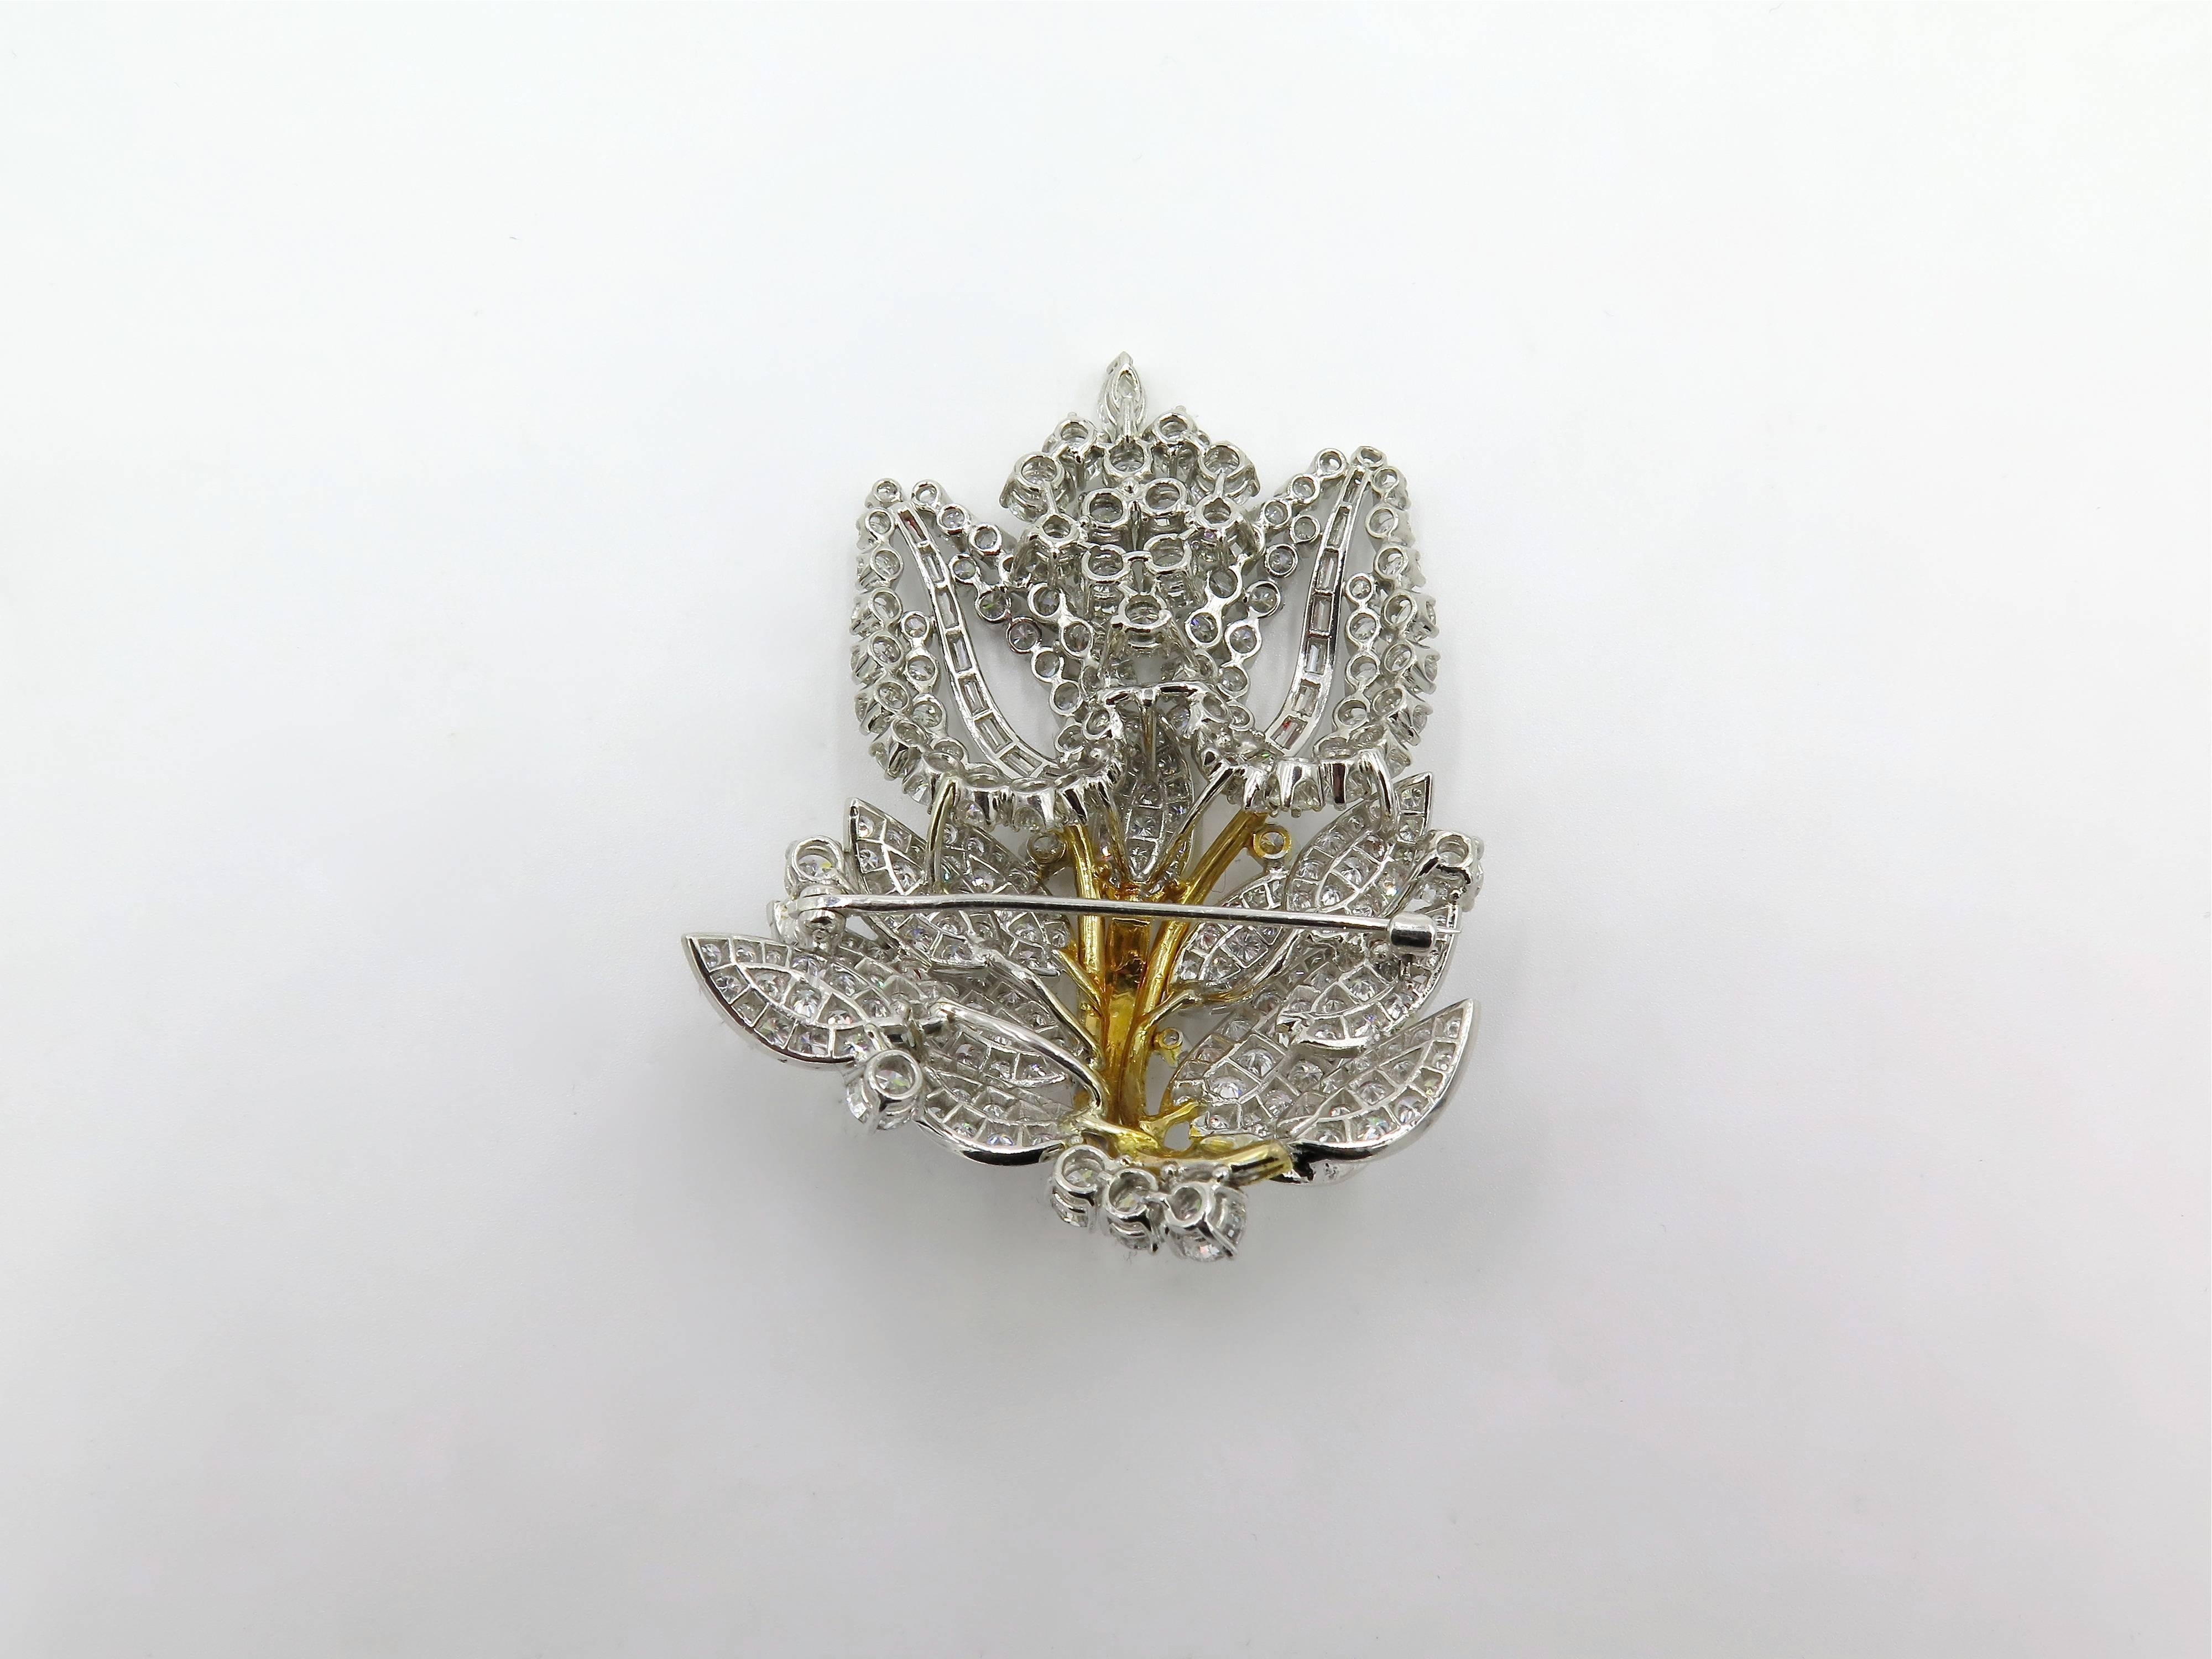 A platinum, 14 karat yellow gold and diamond brooch. Circa 1970. Of openwork foliate spray design, centering a textured gold stem, extending pave set diamond leaves, enhanced by circular, baguette and marquise cut diamonds. Two hundred and seventy